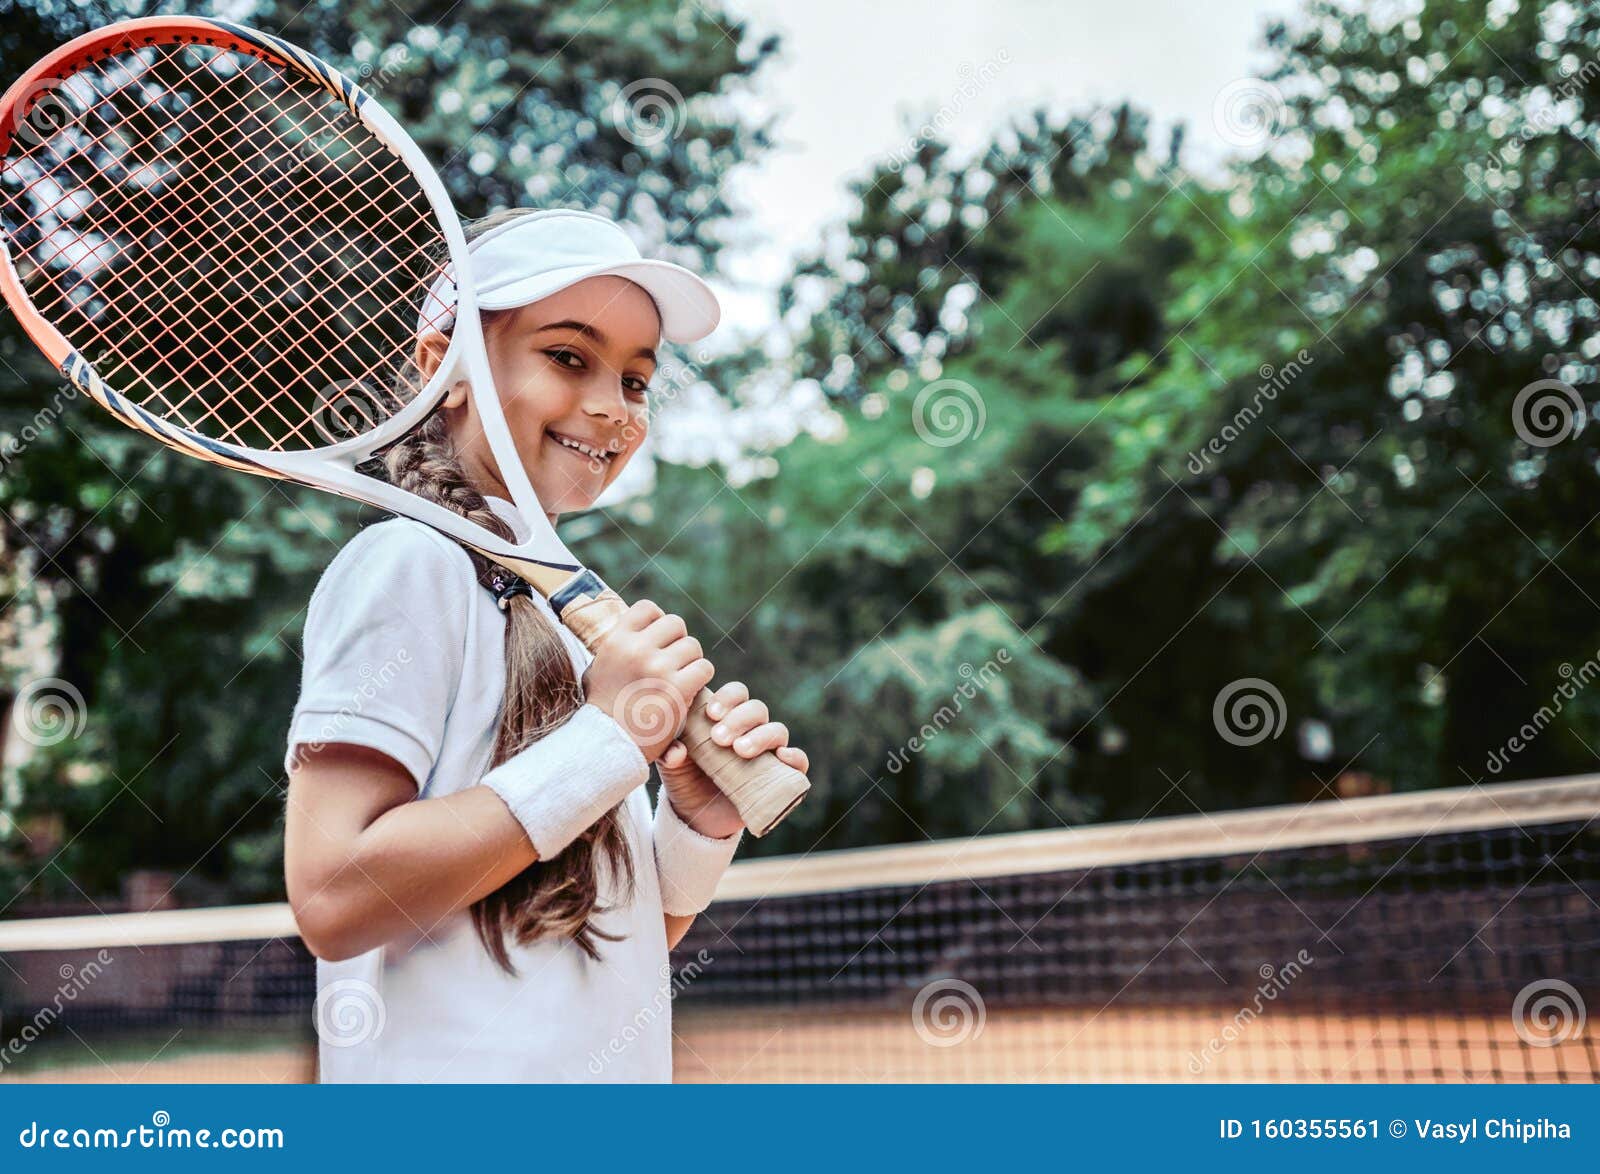 bevroren Orthodox Hassy Tennis Training for Young Kid Outdoors. Portrait of Happy Sporty Little  Girl on Tennis Court Stock Image - Image of beauty, game: 160355561